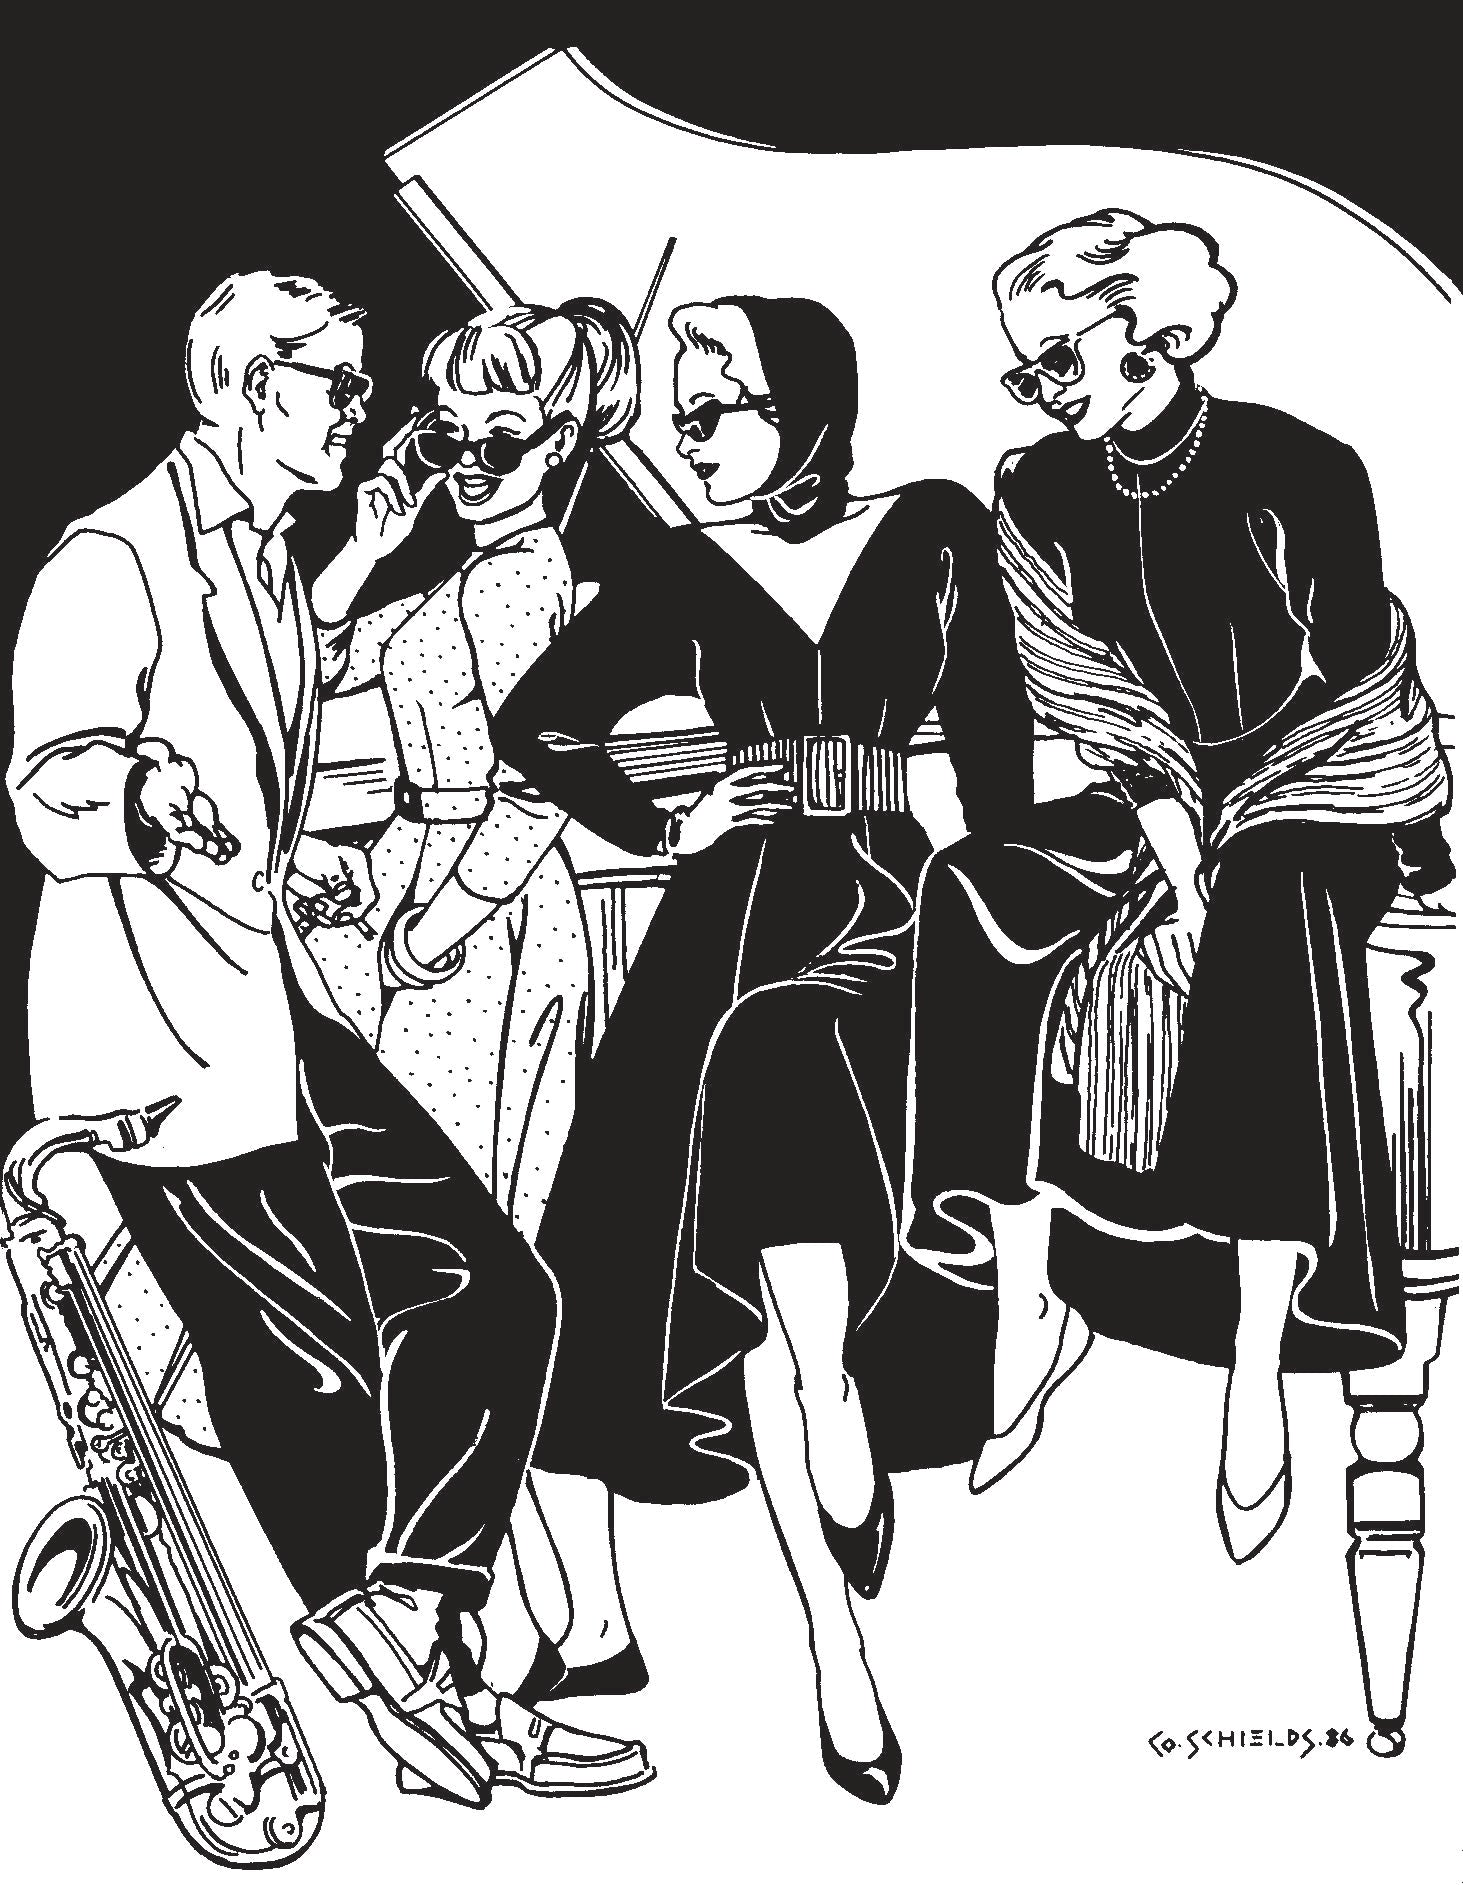 Black and white pen and ink illustration of three women in fit and flair dresses wearing sunglasses and talking to a man with a saxophone.